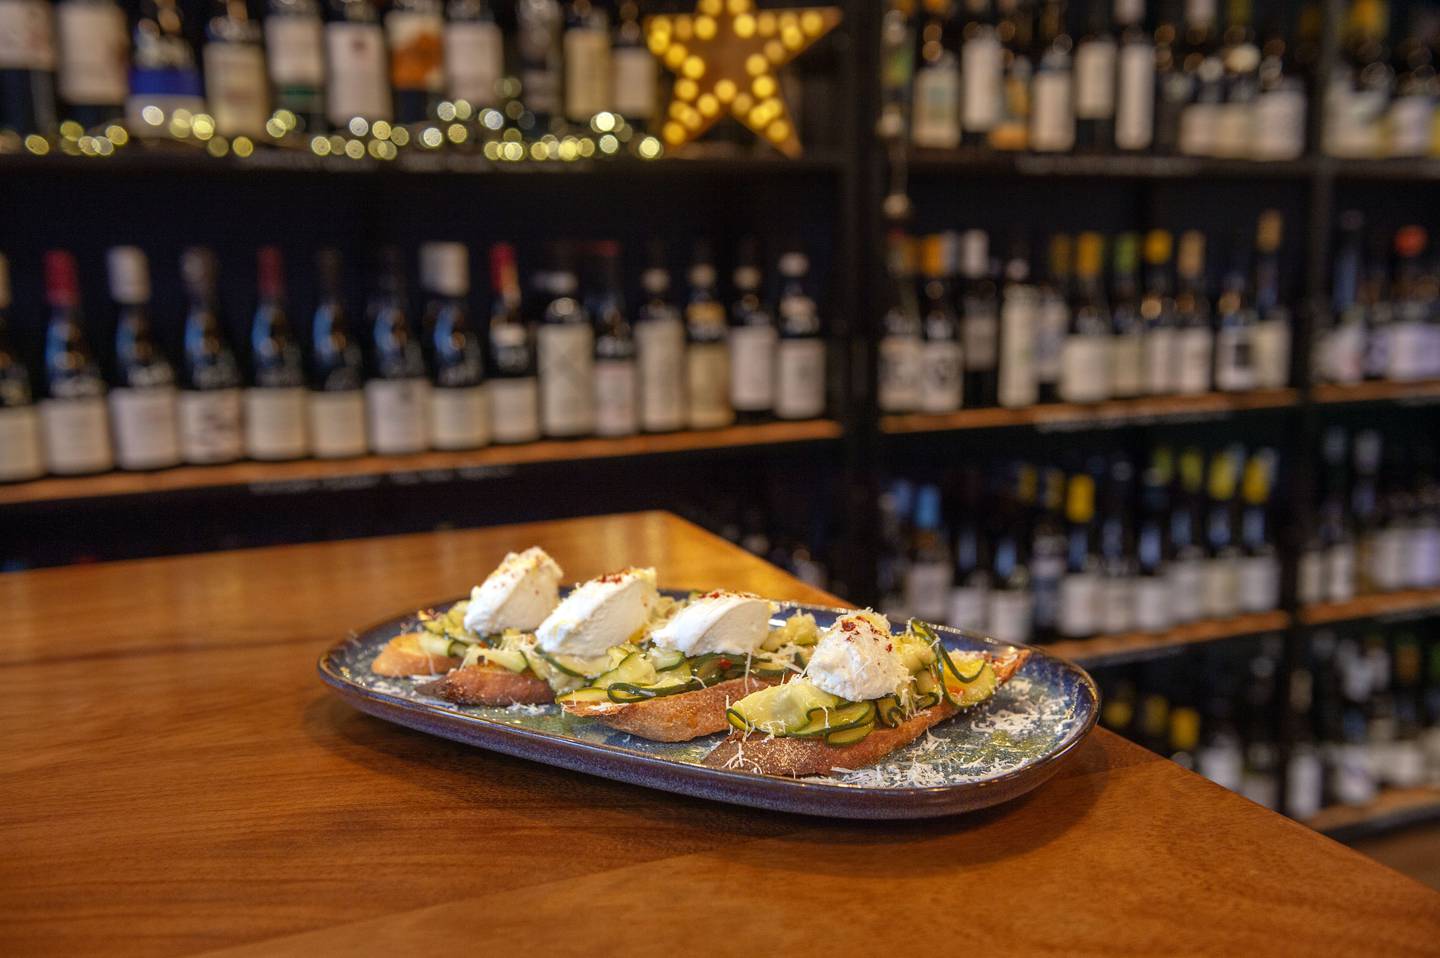 Mac Curtain Wine Cellar, Cork: A sharing plate of 'Nduja and dried tomato crostini with lemon, chilli and garlic courgette.